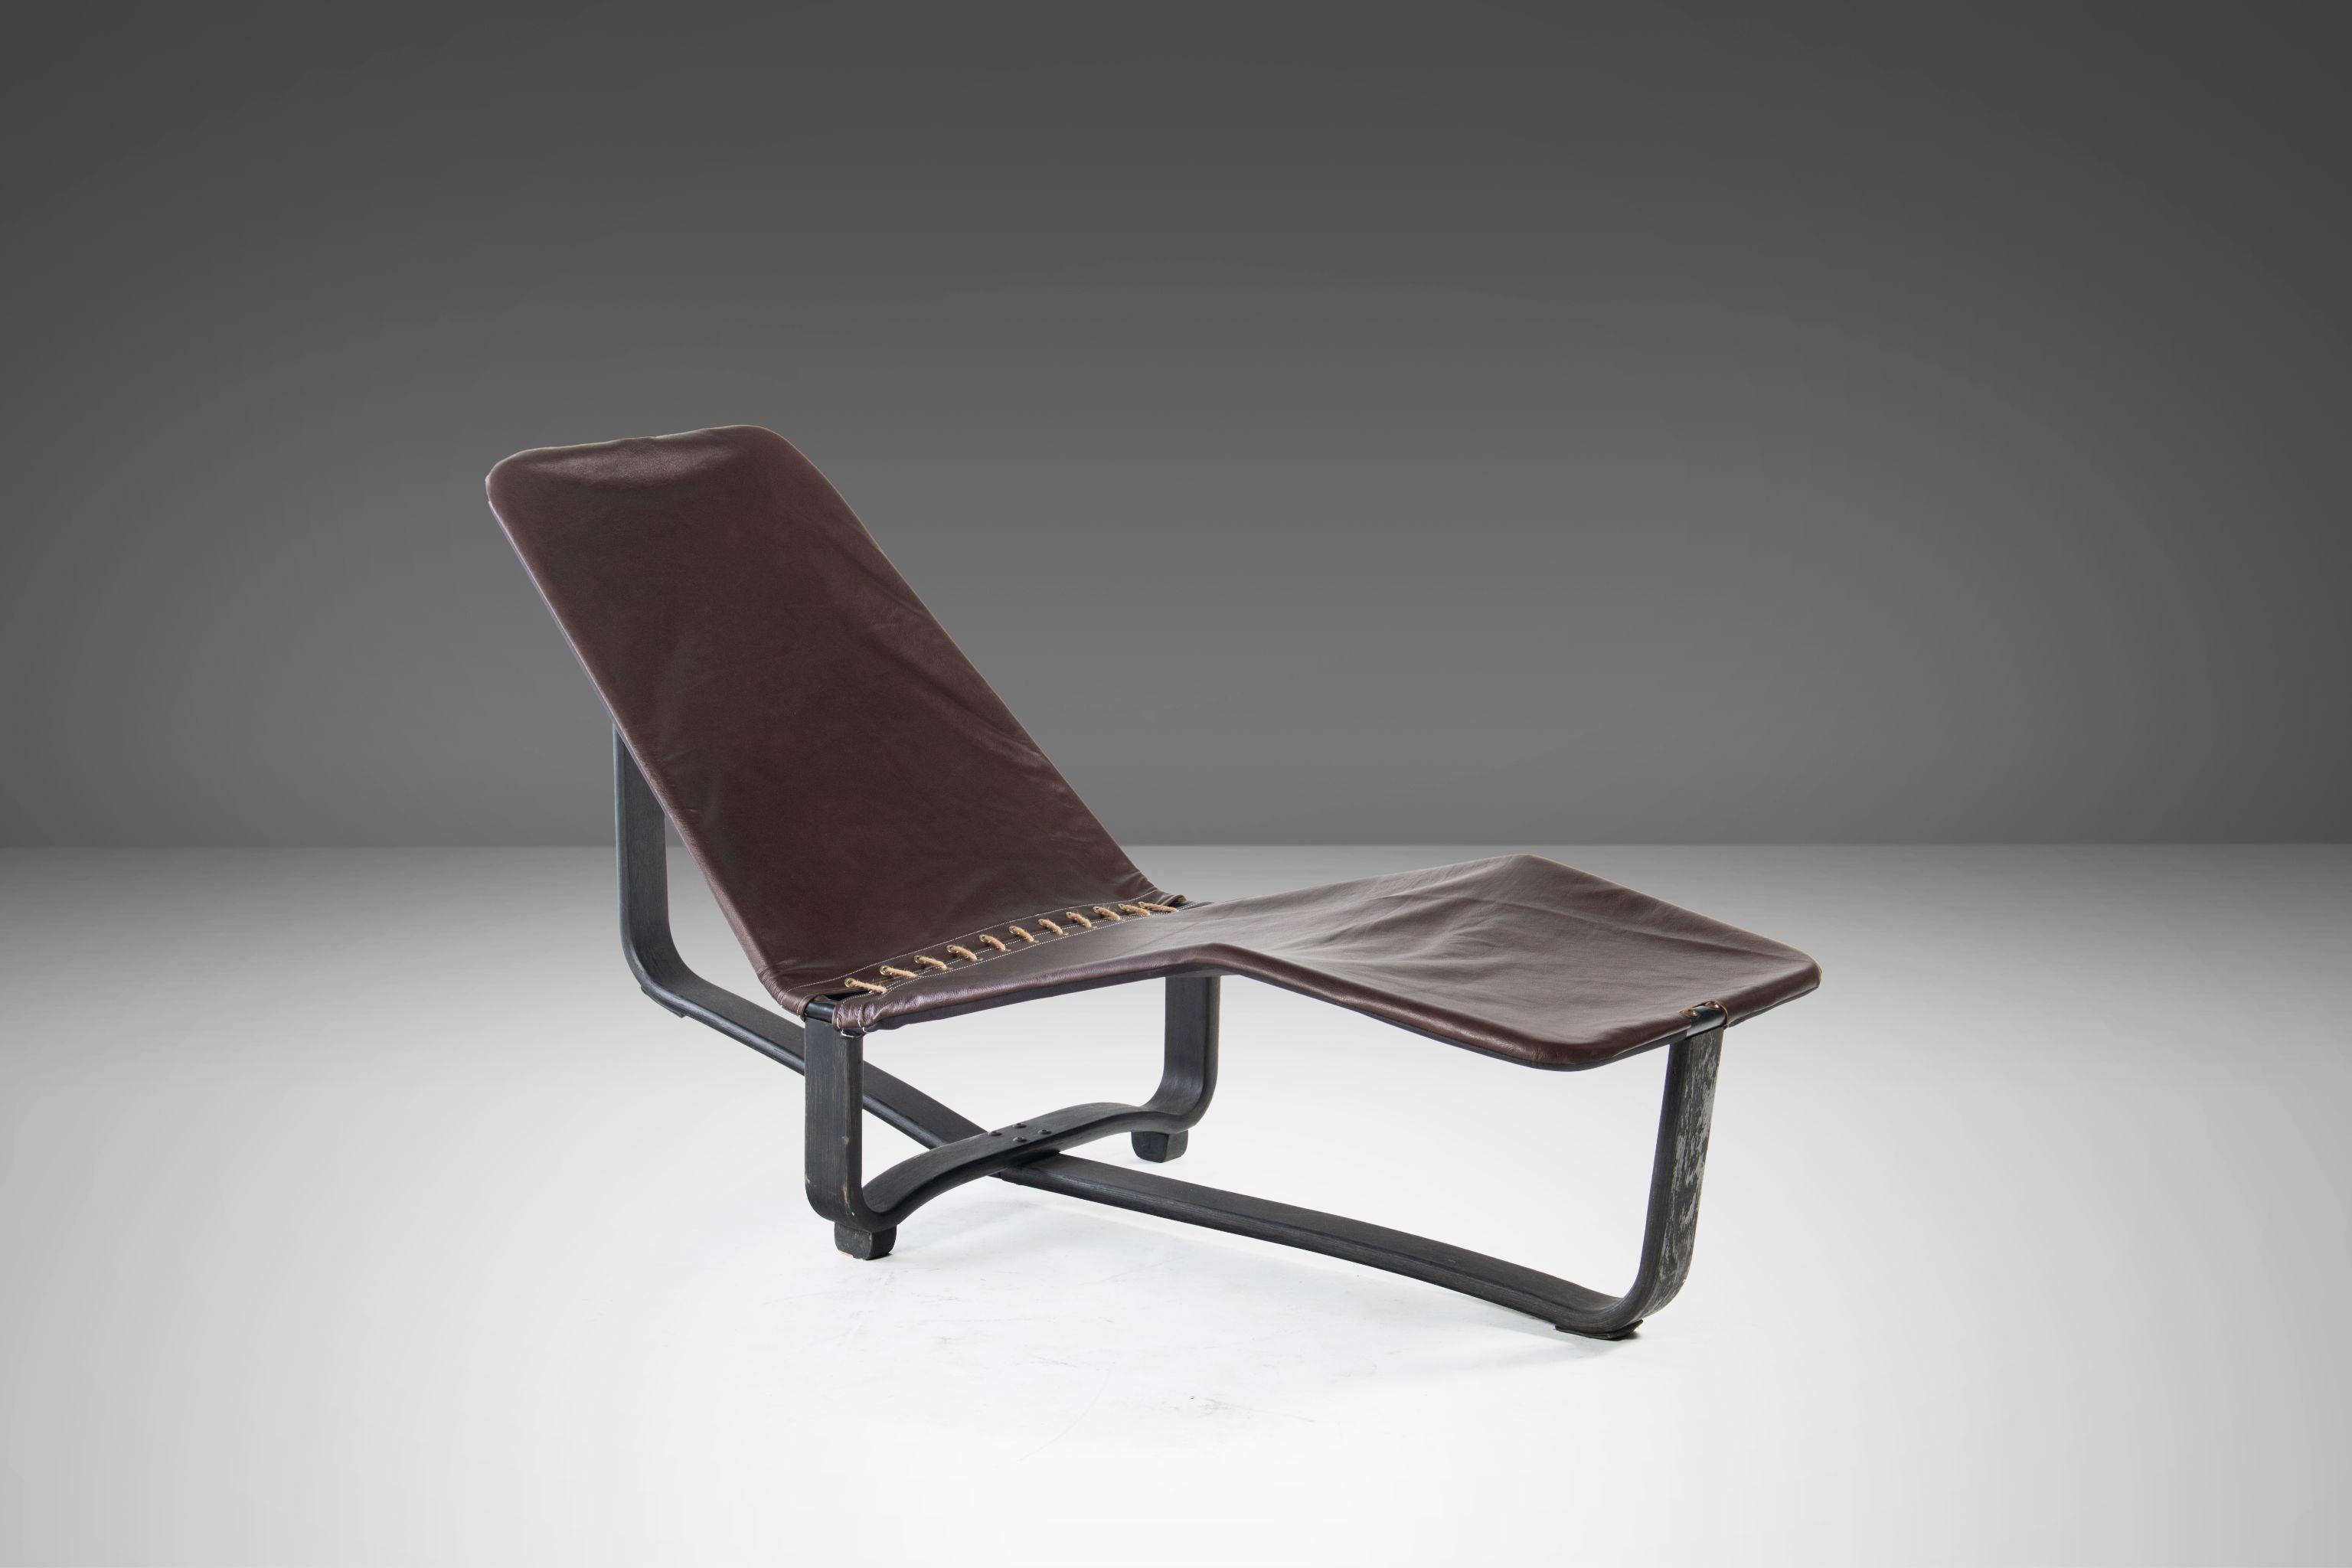 Mid-Century Modern Westnofa Chaise Lounge Chair by Ingmar & Knut Relling for Vestlandske, c. 1970's For Sale